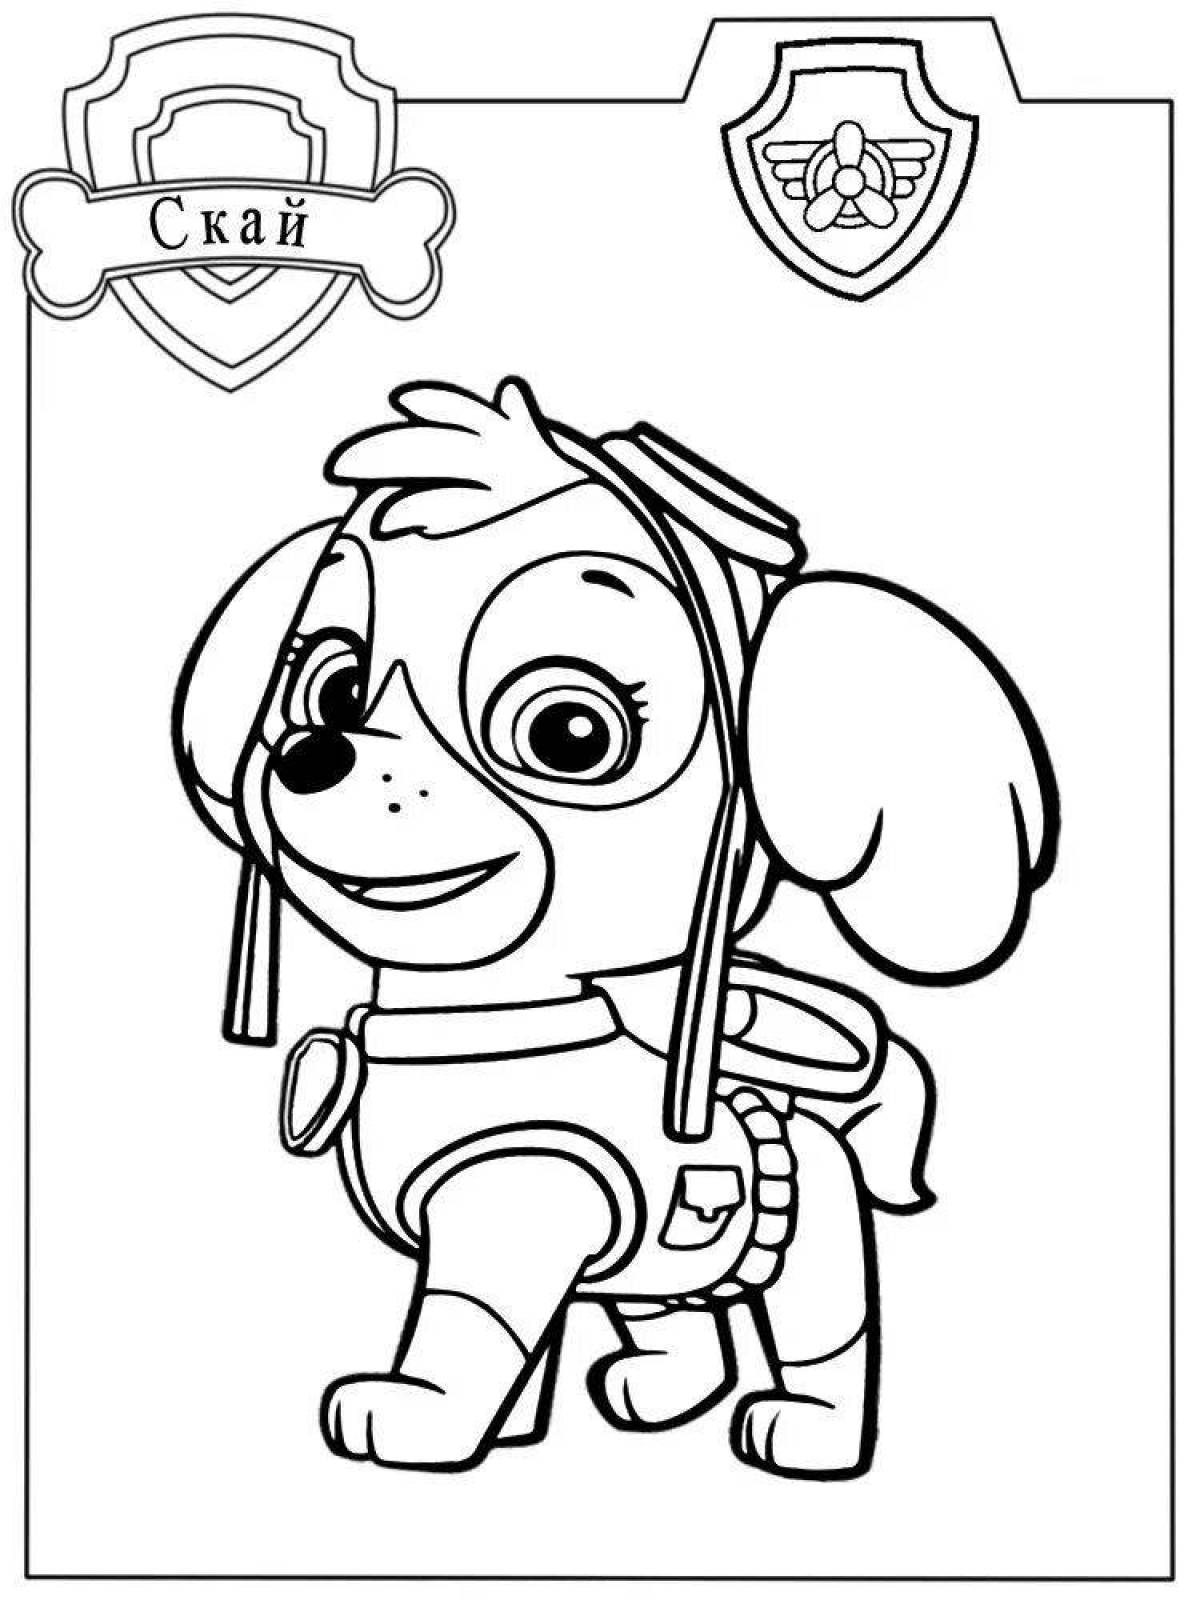 Snuggly coloring page щенок скай